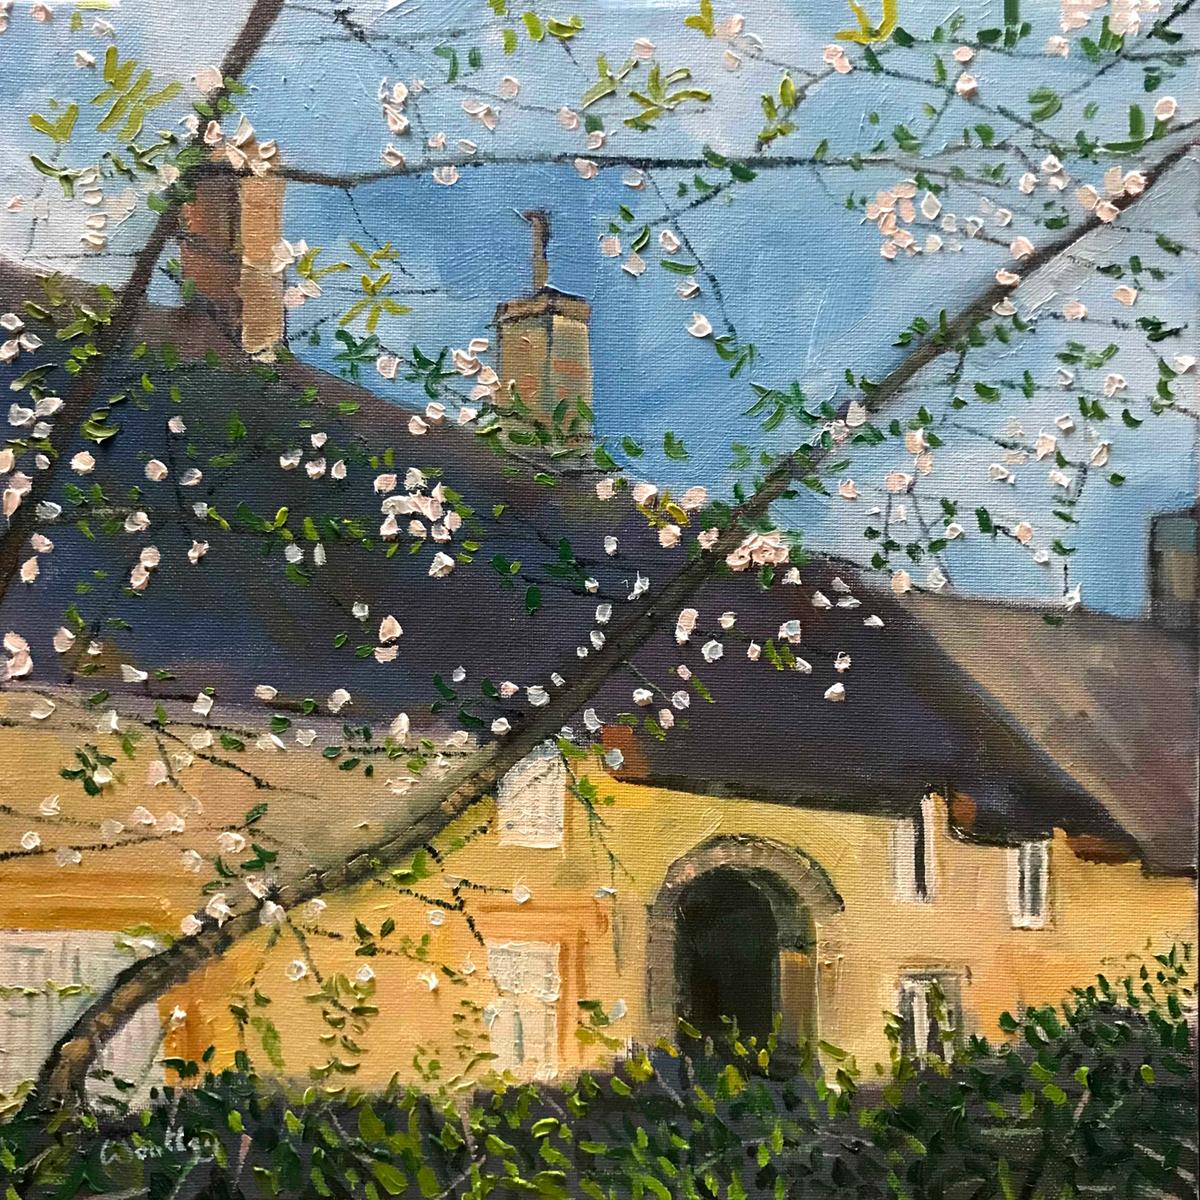 Landscape Painting Eleanor Woolley - Great Tew, Cottage, Cotswolds, Blossom, Trees, Windows, Thatch, Brown, Black